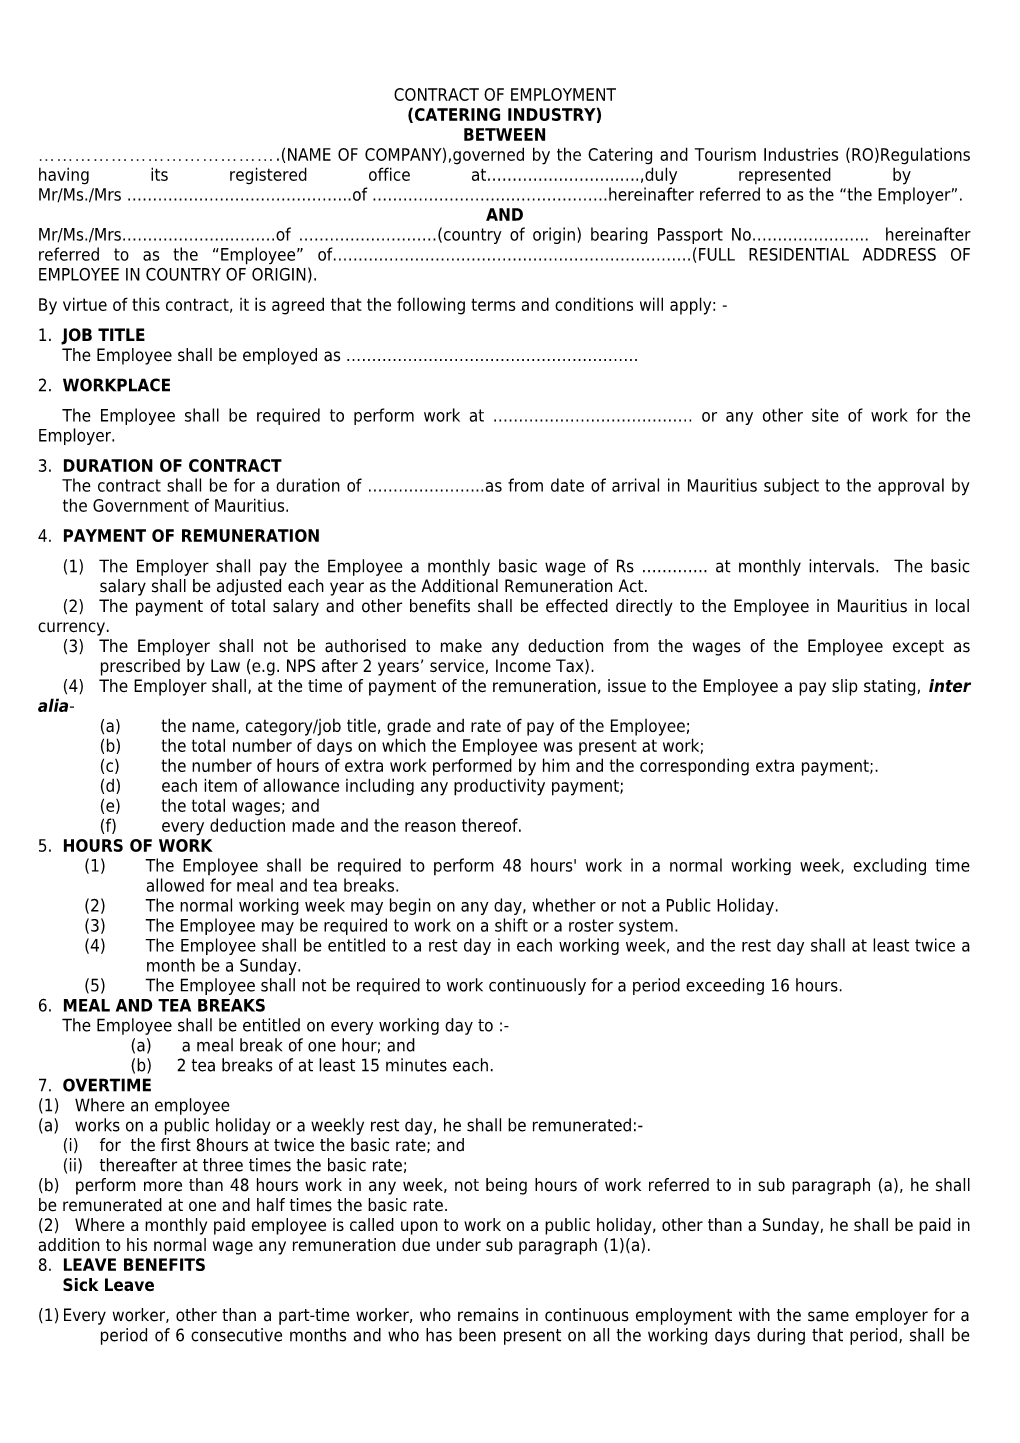 Contract of Employment s5